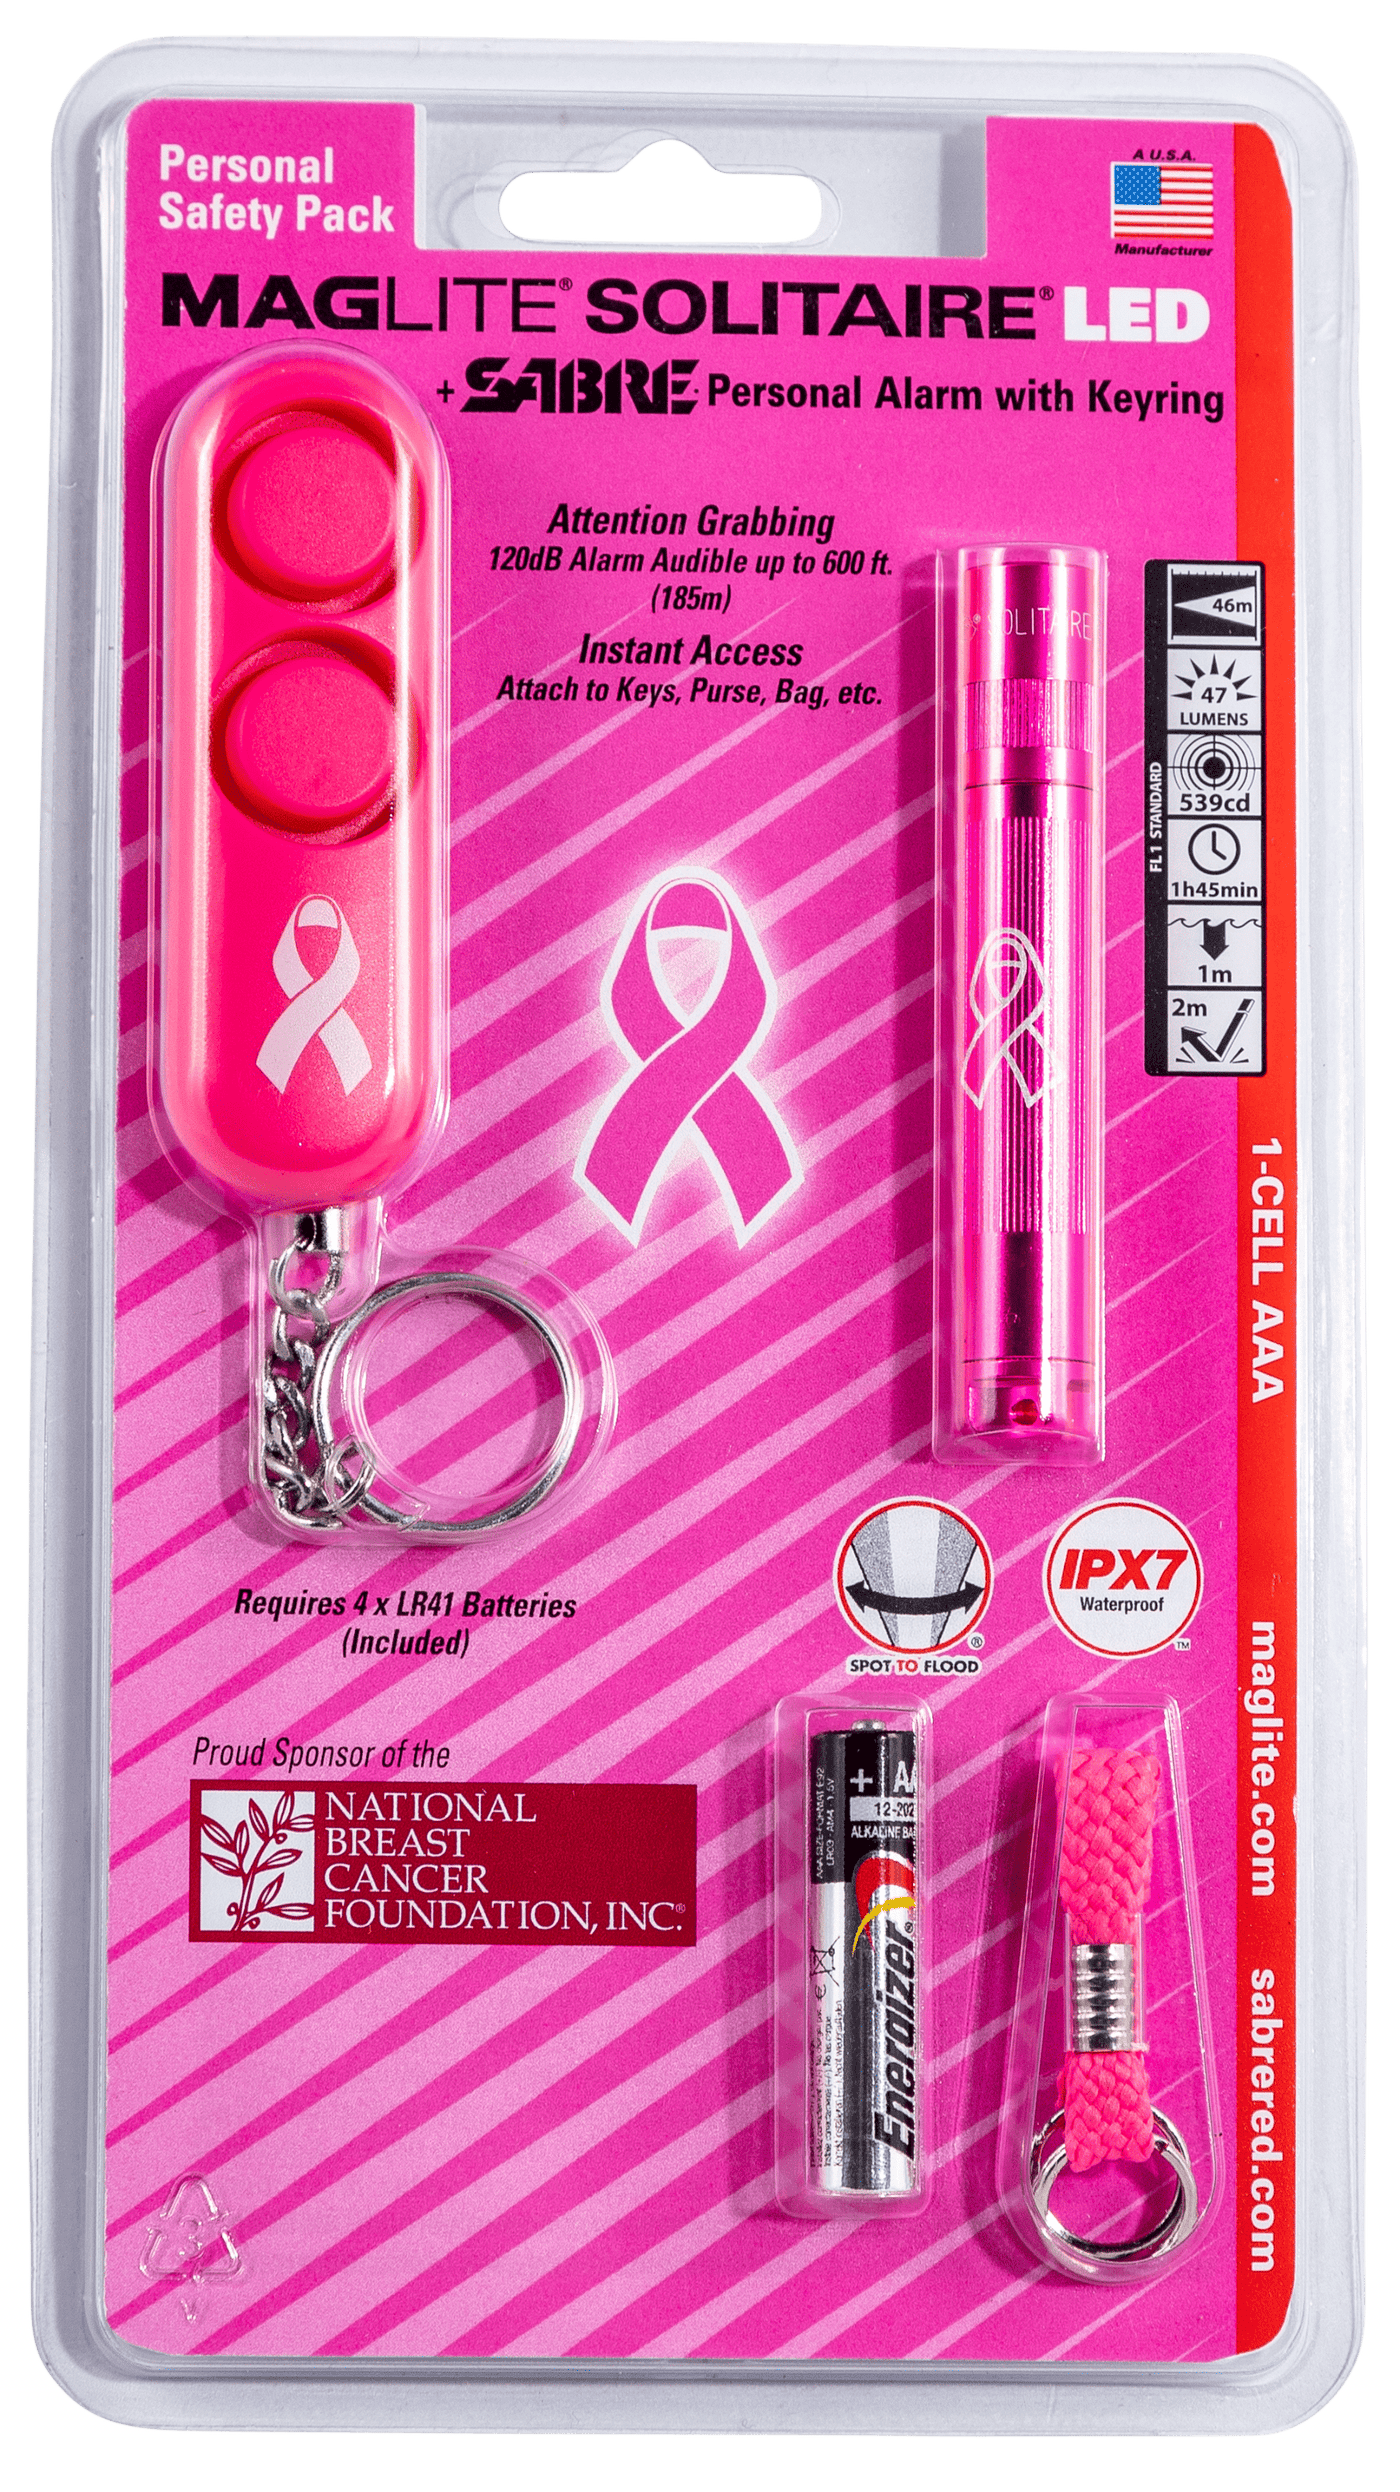 Maglite Maglite Solitaire, Mlt Sj3aud6   Solitaire And Personal Alarm Pink Accessories